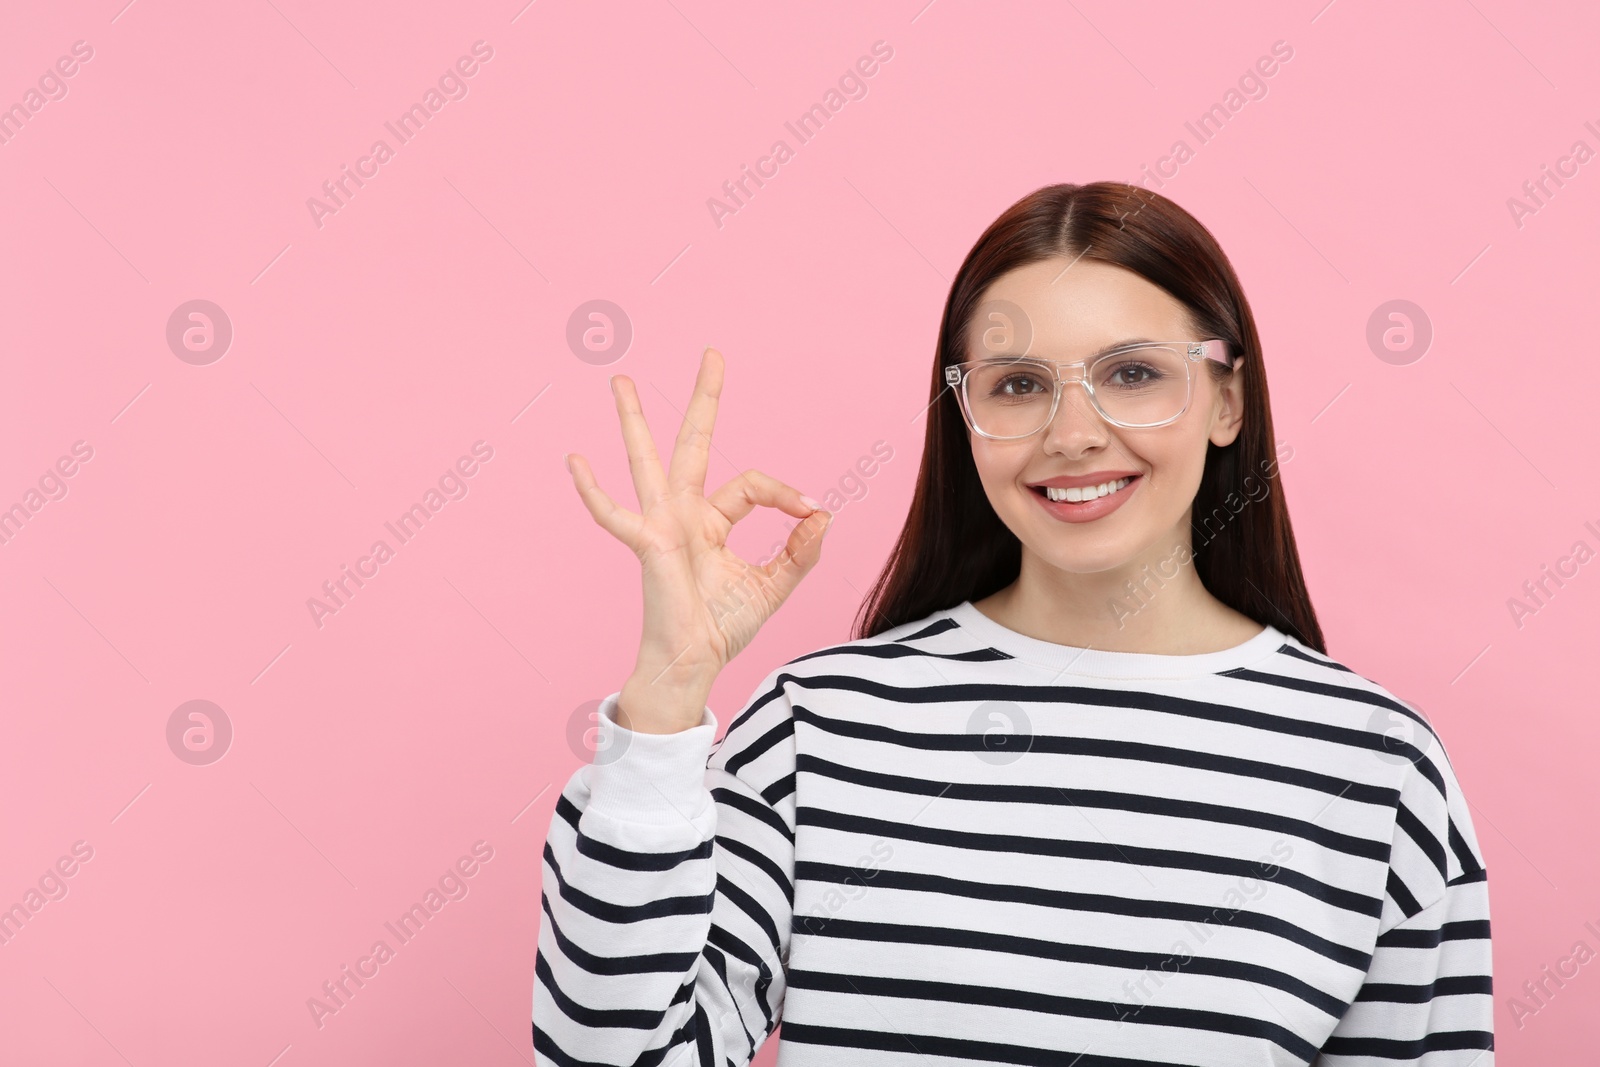 Photo of Smiling woman in stylish eyeglasses showing ok gesture on pink background. Space for text